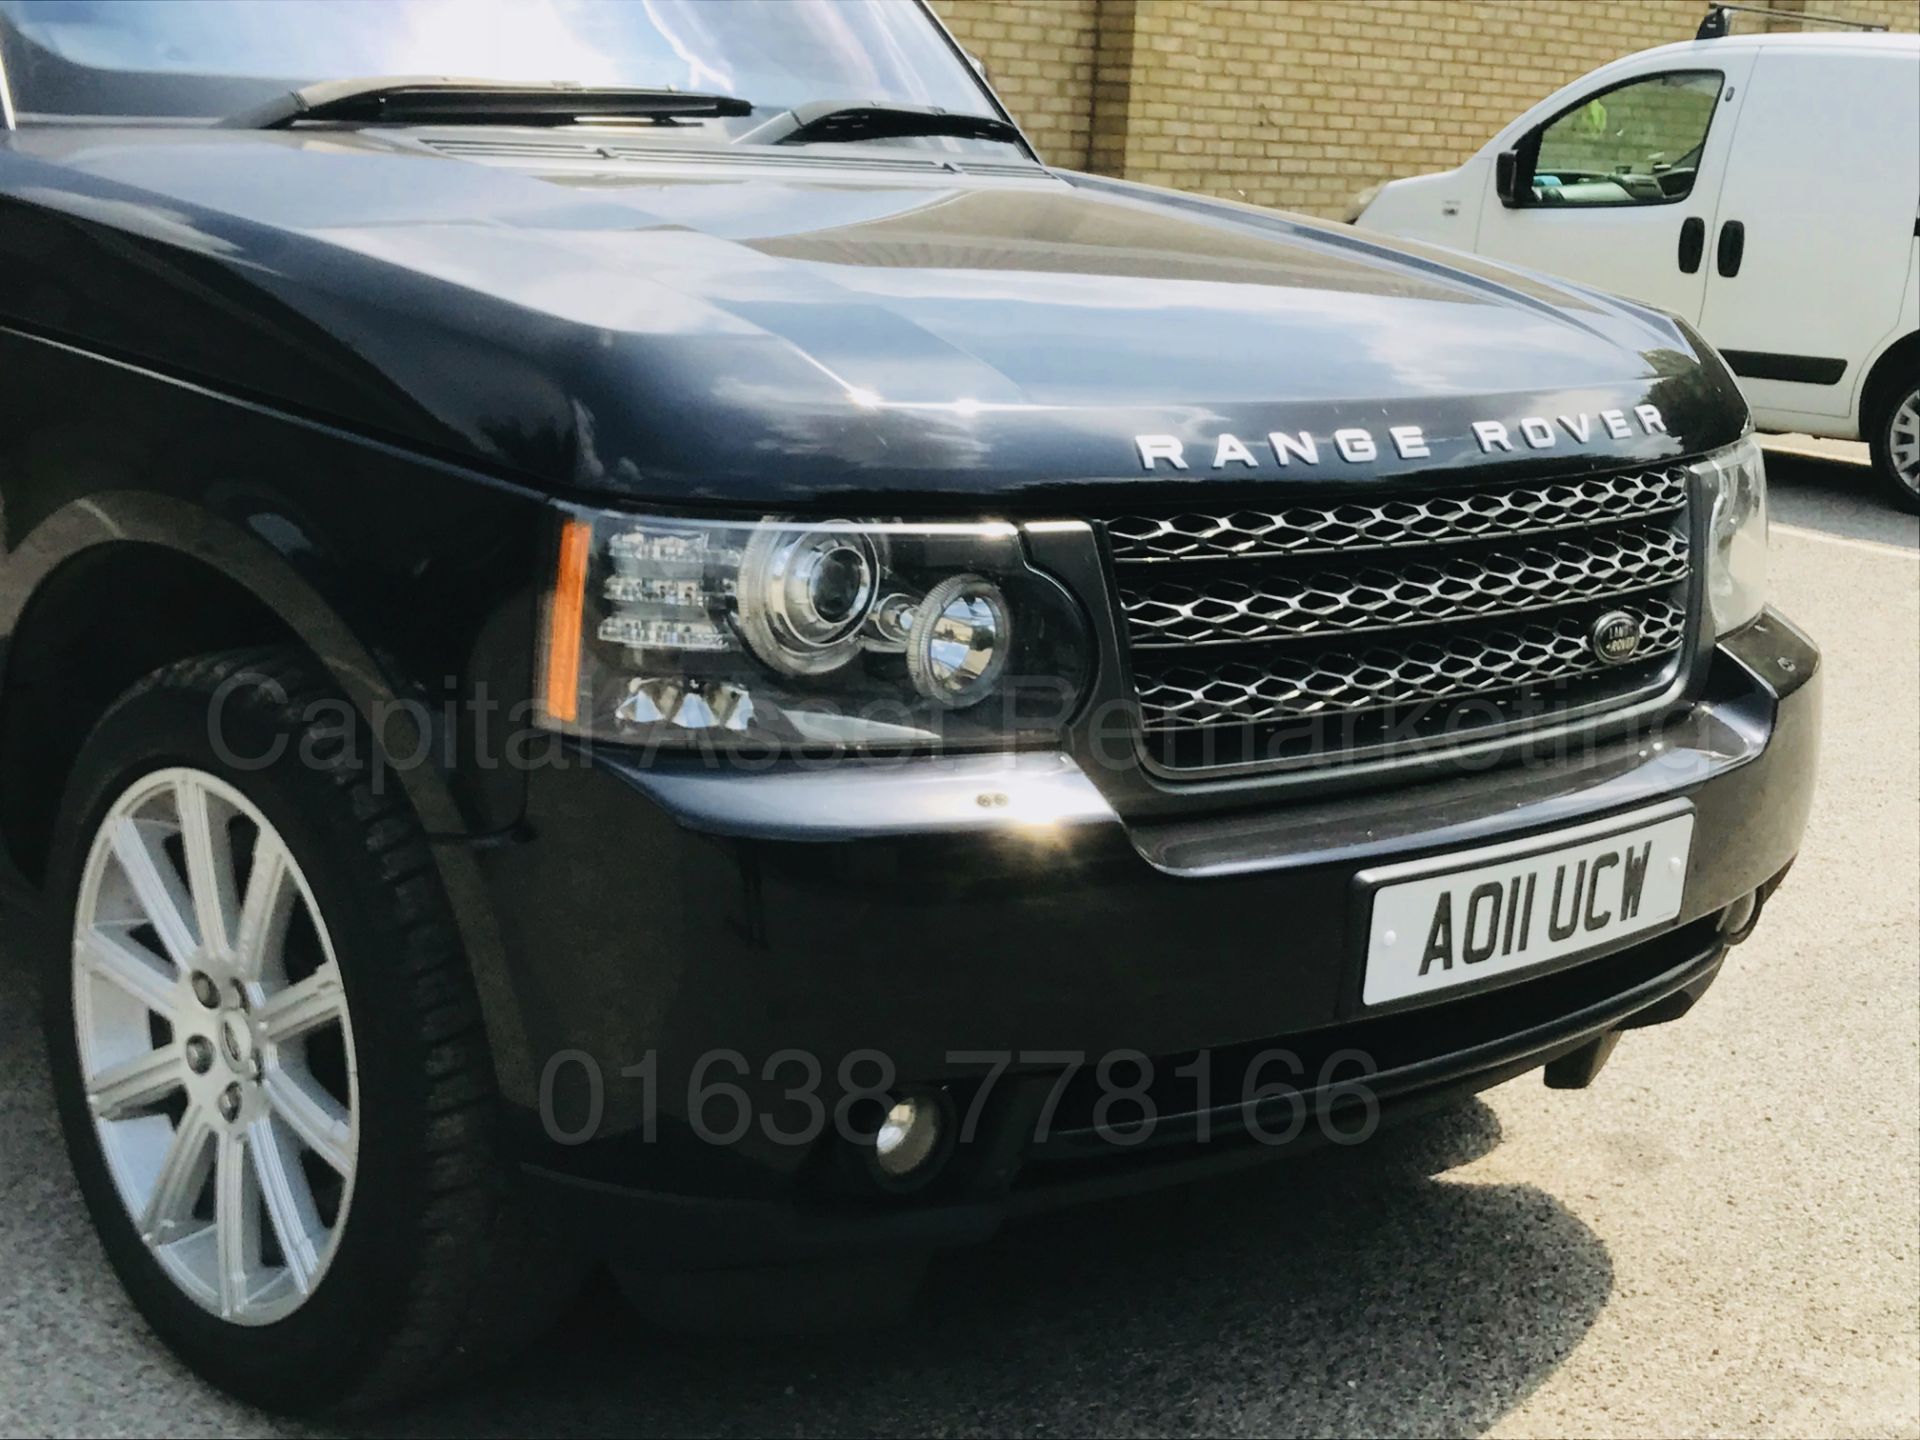 (On Sale) RANGE ROVER VOGUE SE (2011) 'TDV8 -8 SPEED AUTO' **FULLY LOADED** (1 OWNER - FULL HISTORY) - Image 16 of 60